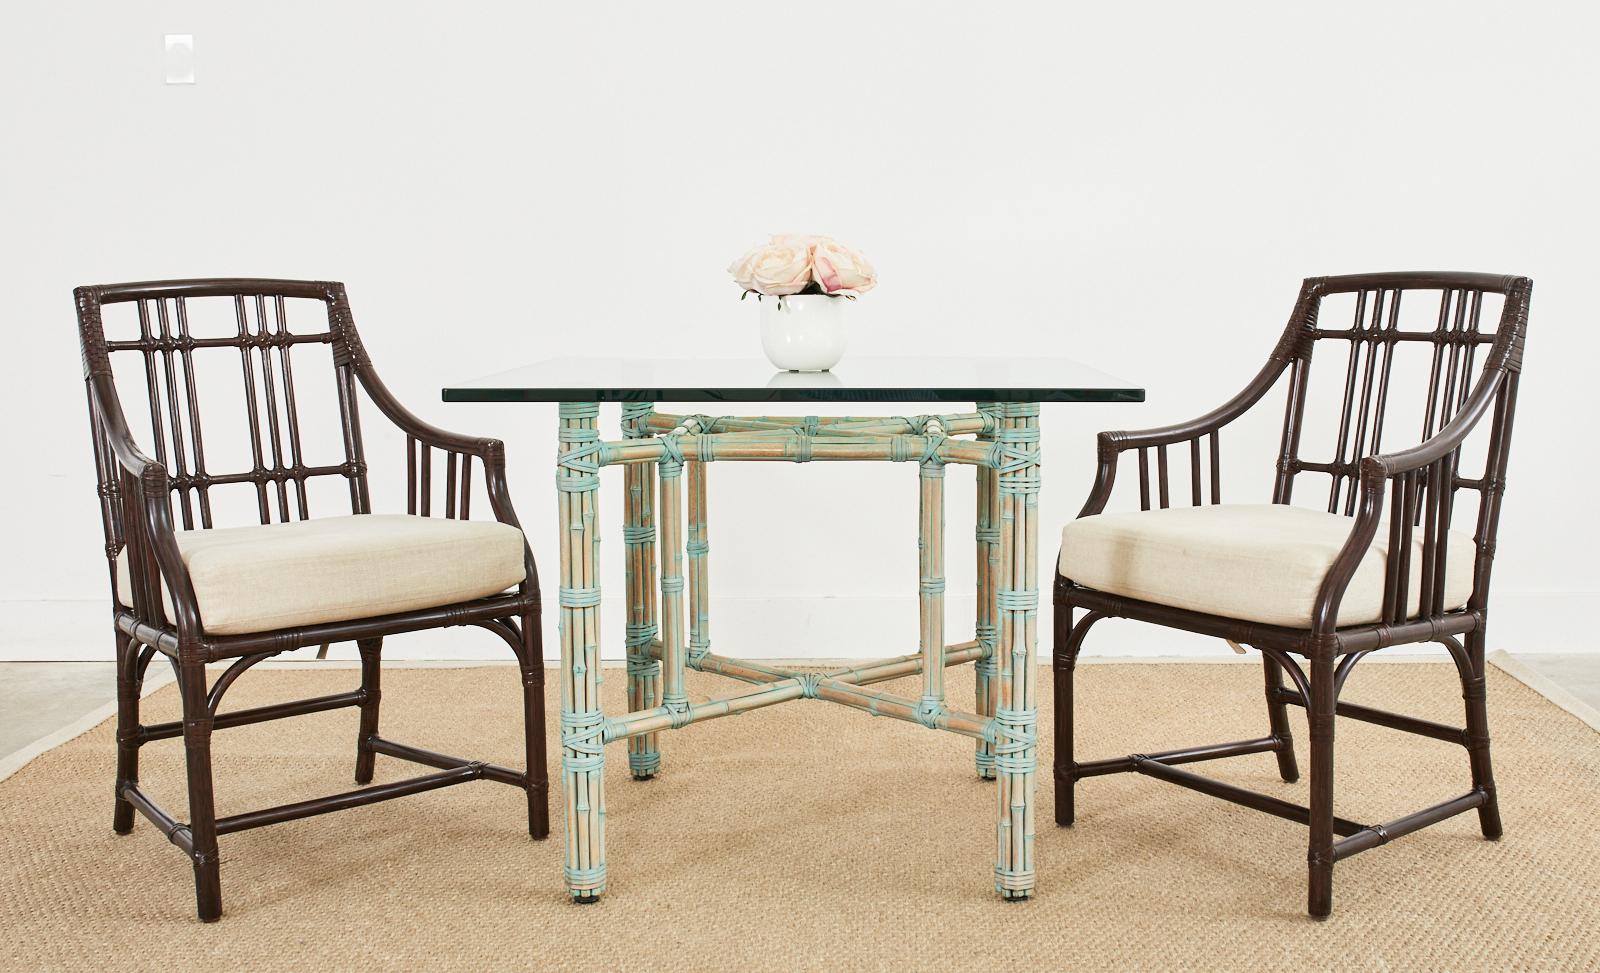 Genuine McGuire bamboo rattan dining table made in the California organic modern style. The table features a rare, bespoke glazed finish with a green verdigris patina tone. Crafted from an iron frame painted golden gate orange for authenticity and